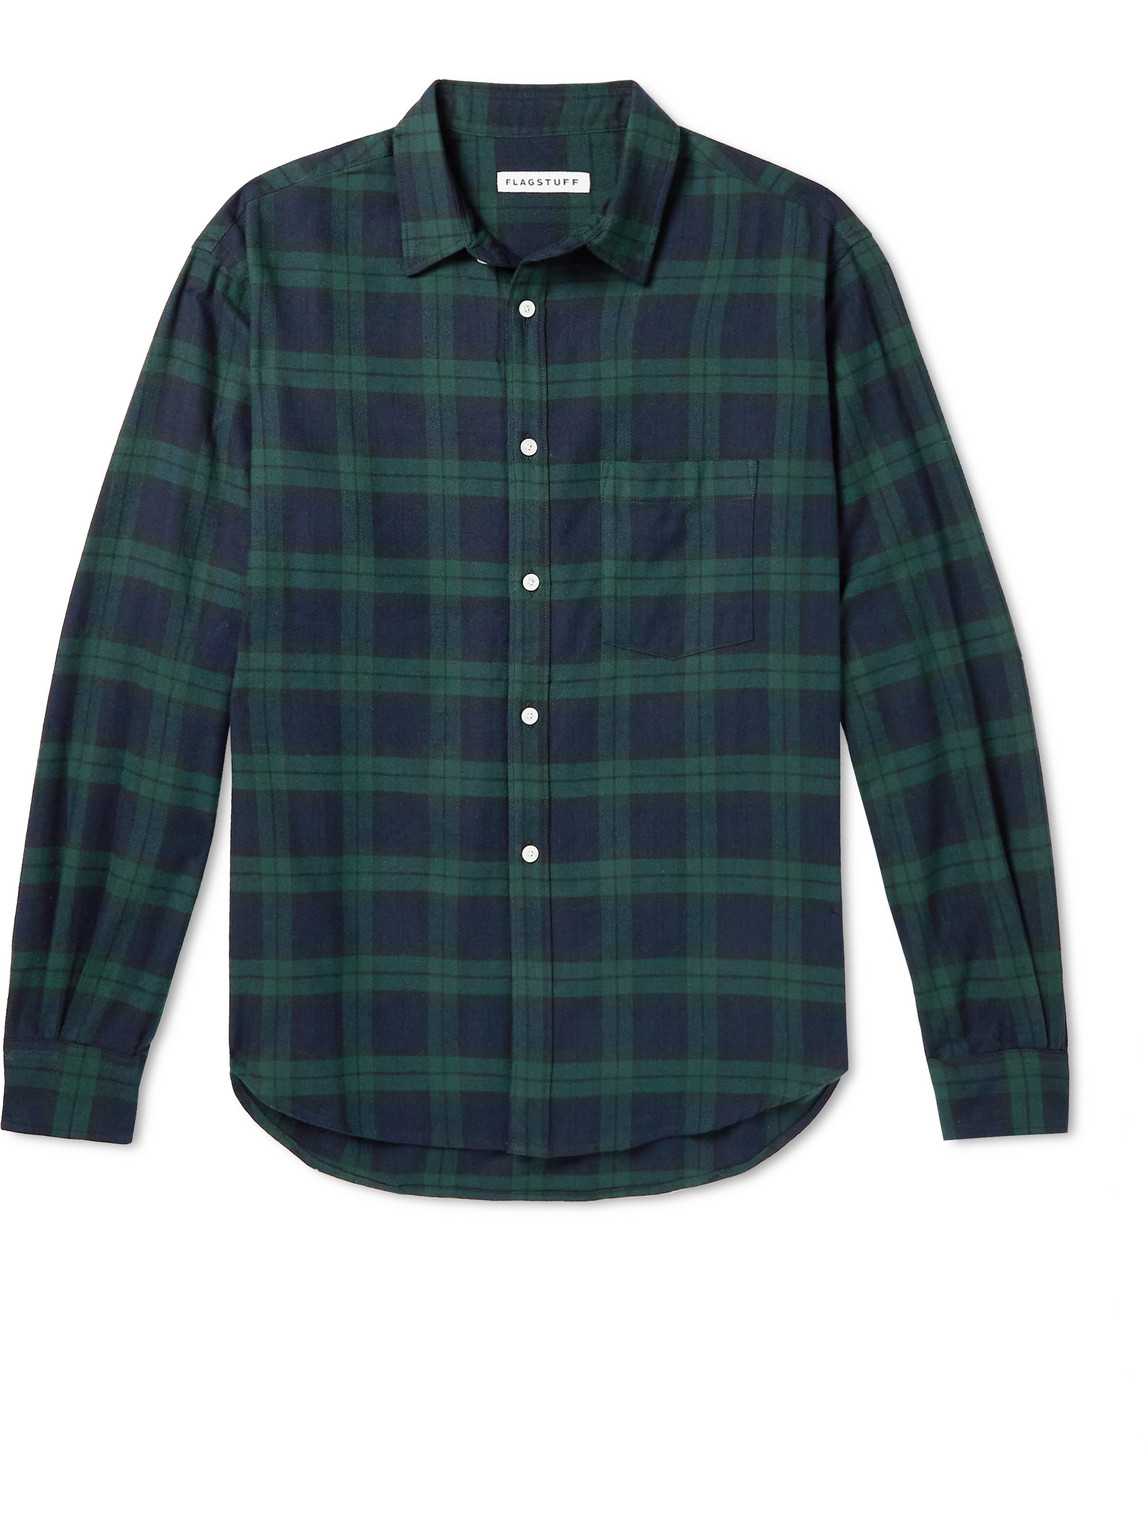 Flagstuff Checked Cotton-Flannel Shirt